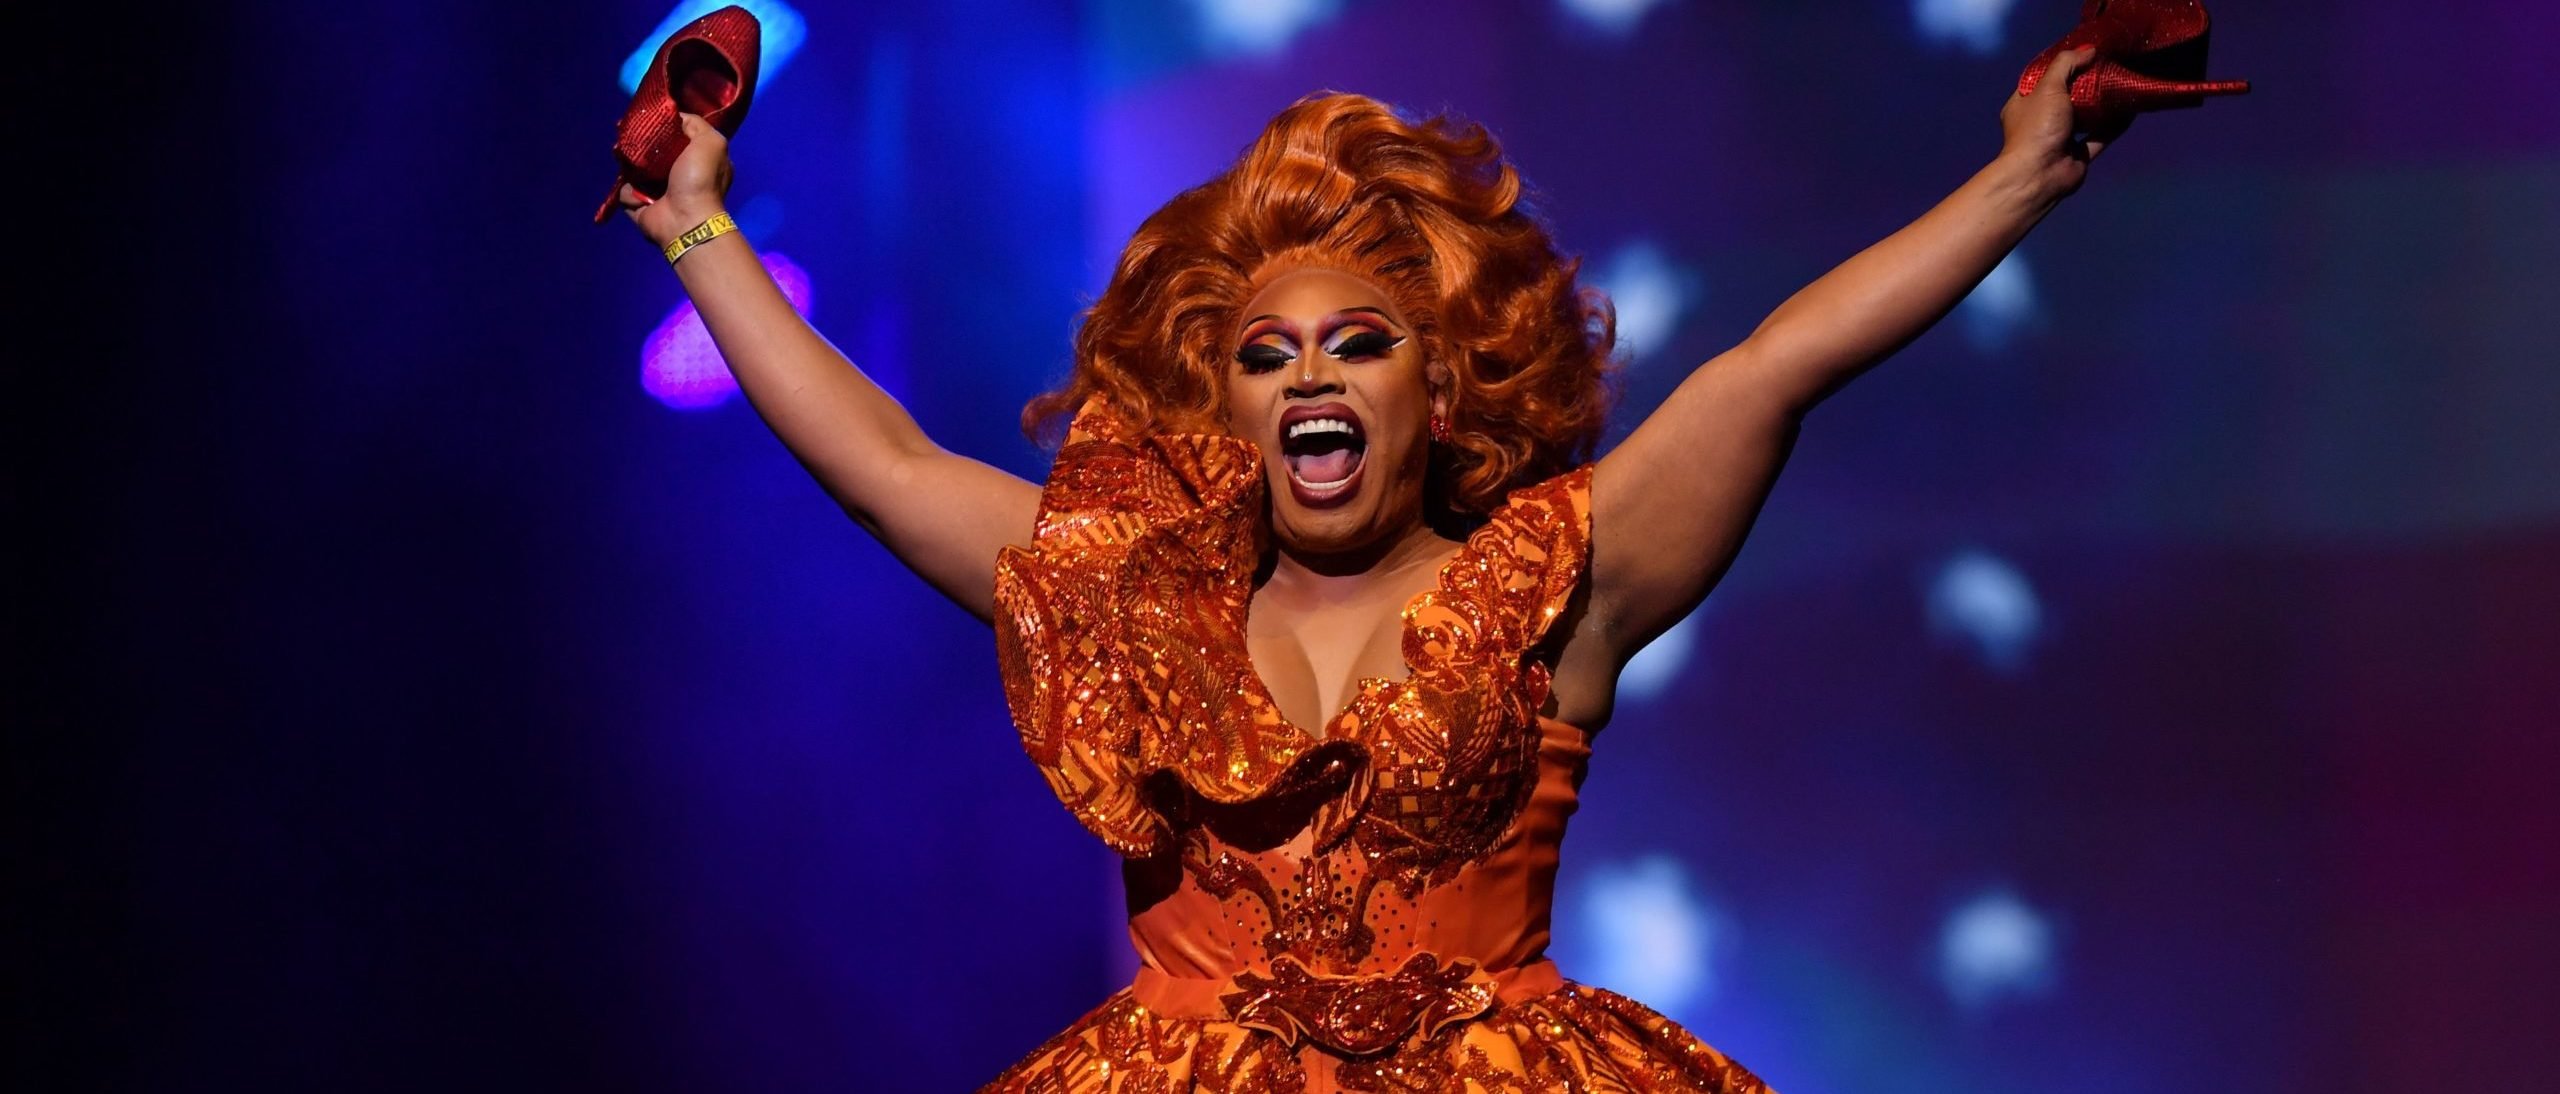 ‘Core To What Our City Embraces’: NYC Mayor Defends Drag Queen Story Hour After Councilwoman’s Comments